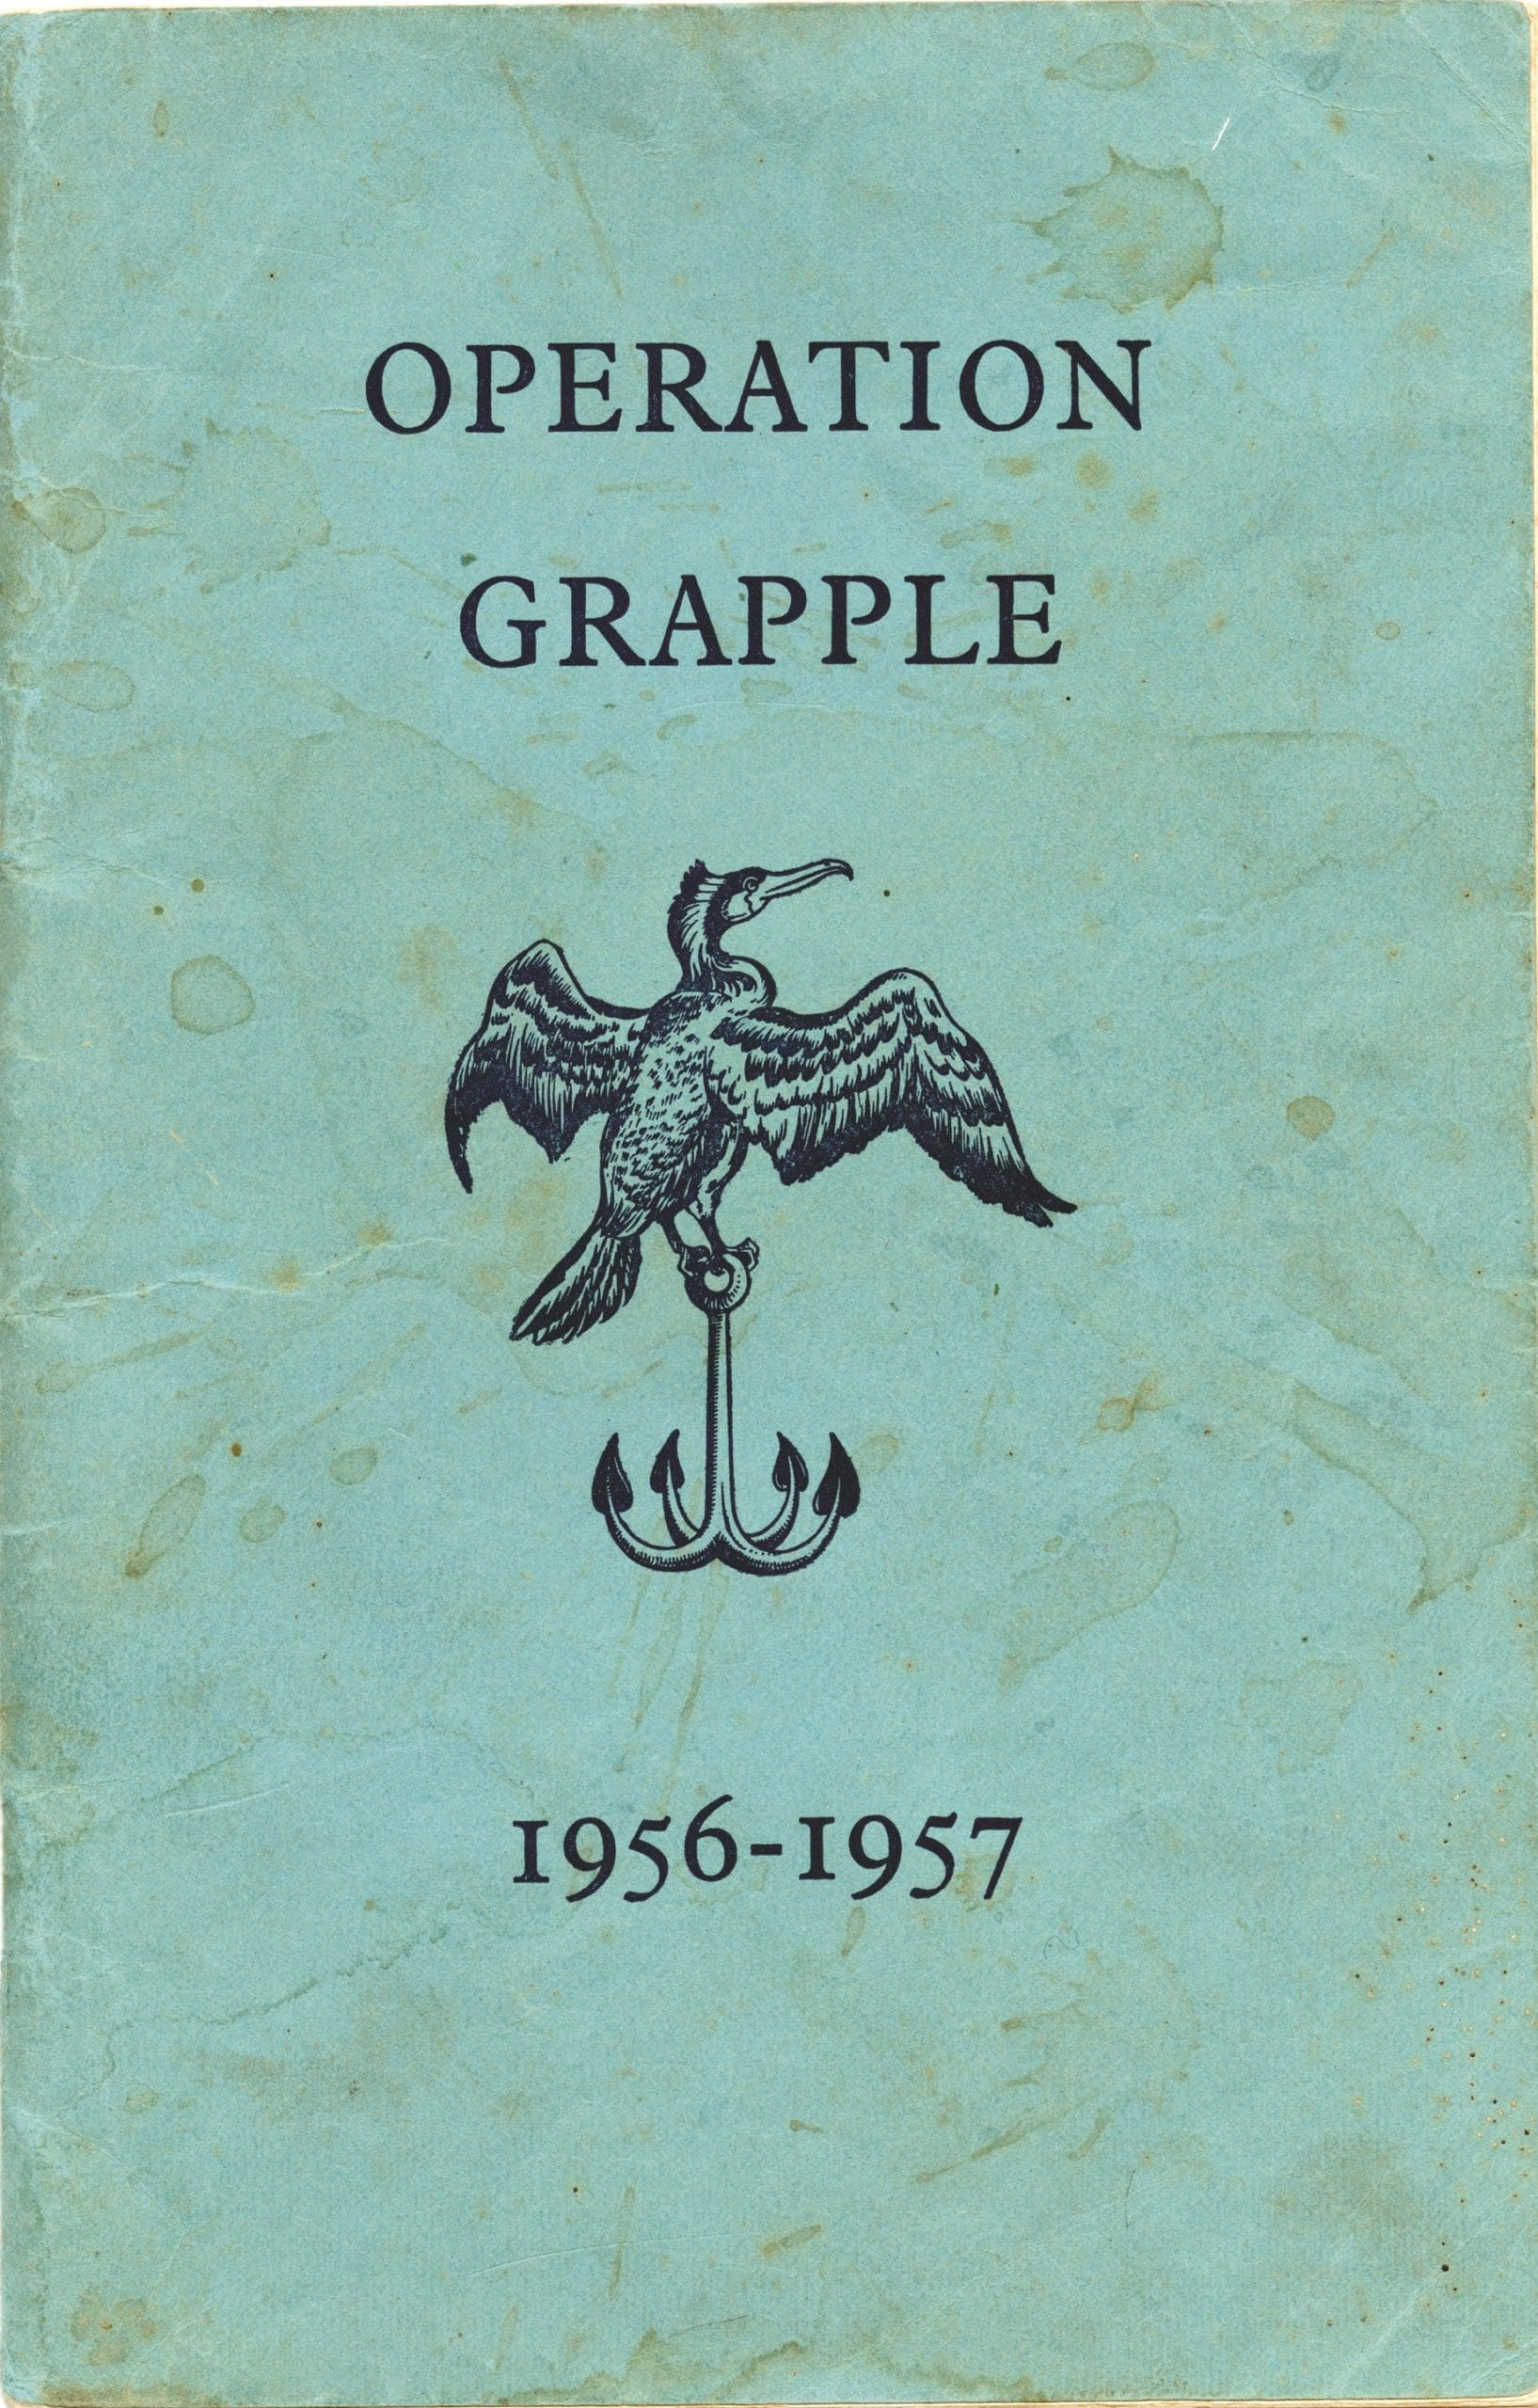 Souvenir Booklet for men serving in Operation Grapple, published by the British Government c 1956